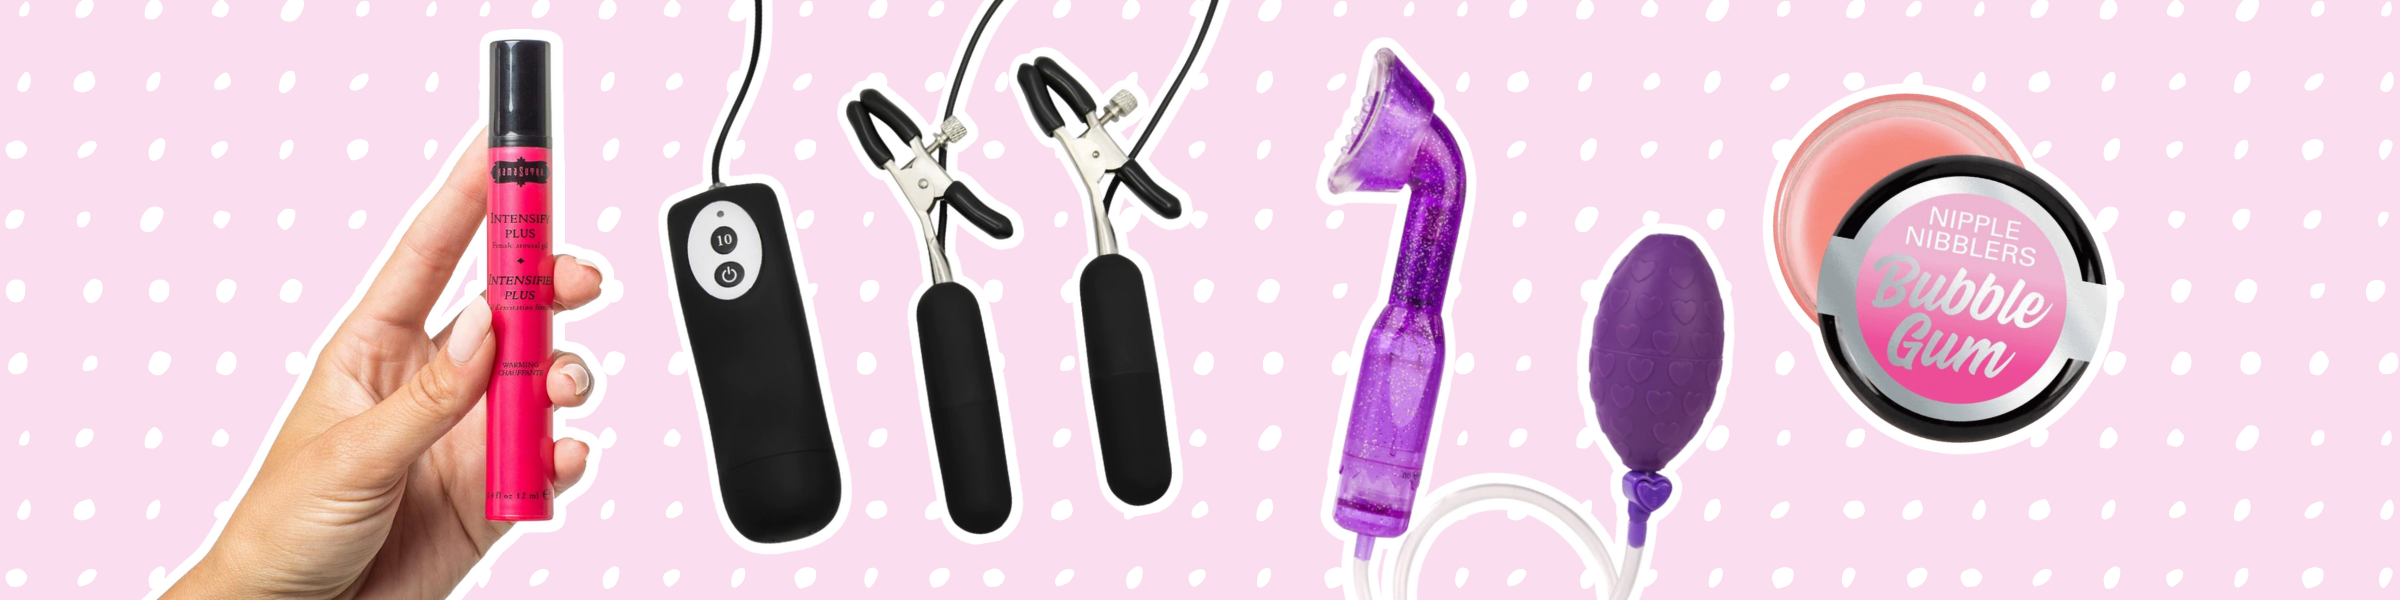 Image of our top selling sexual arousal products on a pink background with polka dots. Image includes an intense clit stimulation cream, vibrating nipple clamps, suction clit pump, and nipple stimulant.